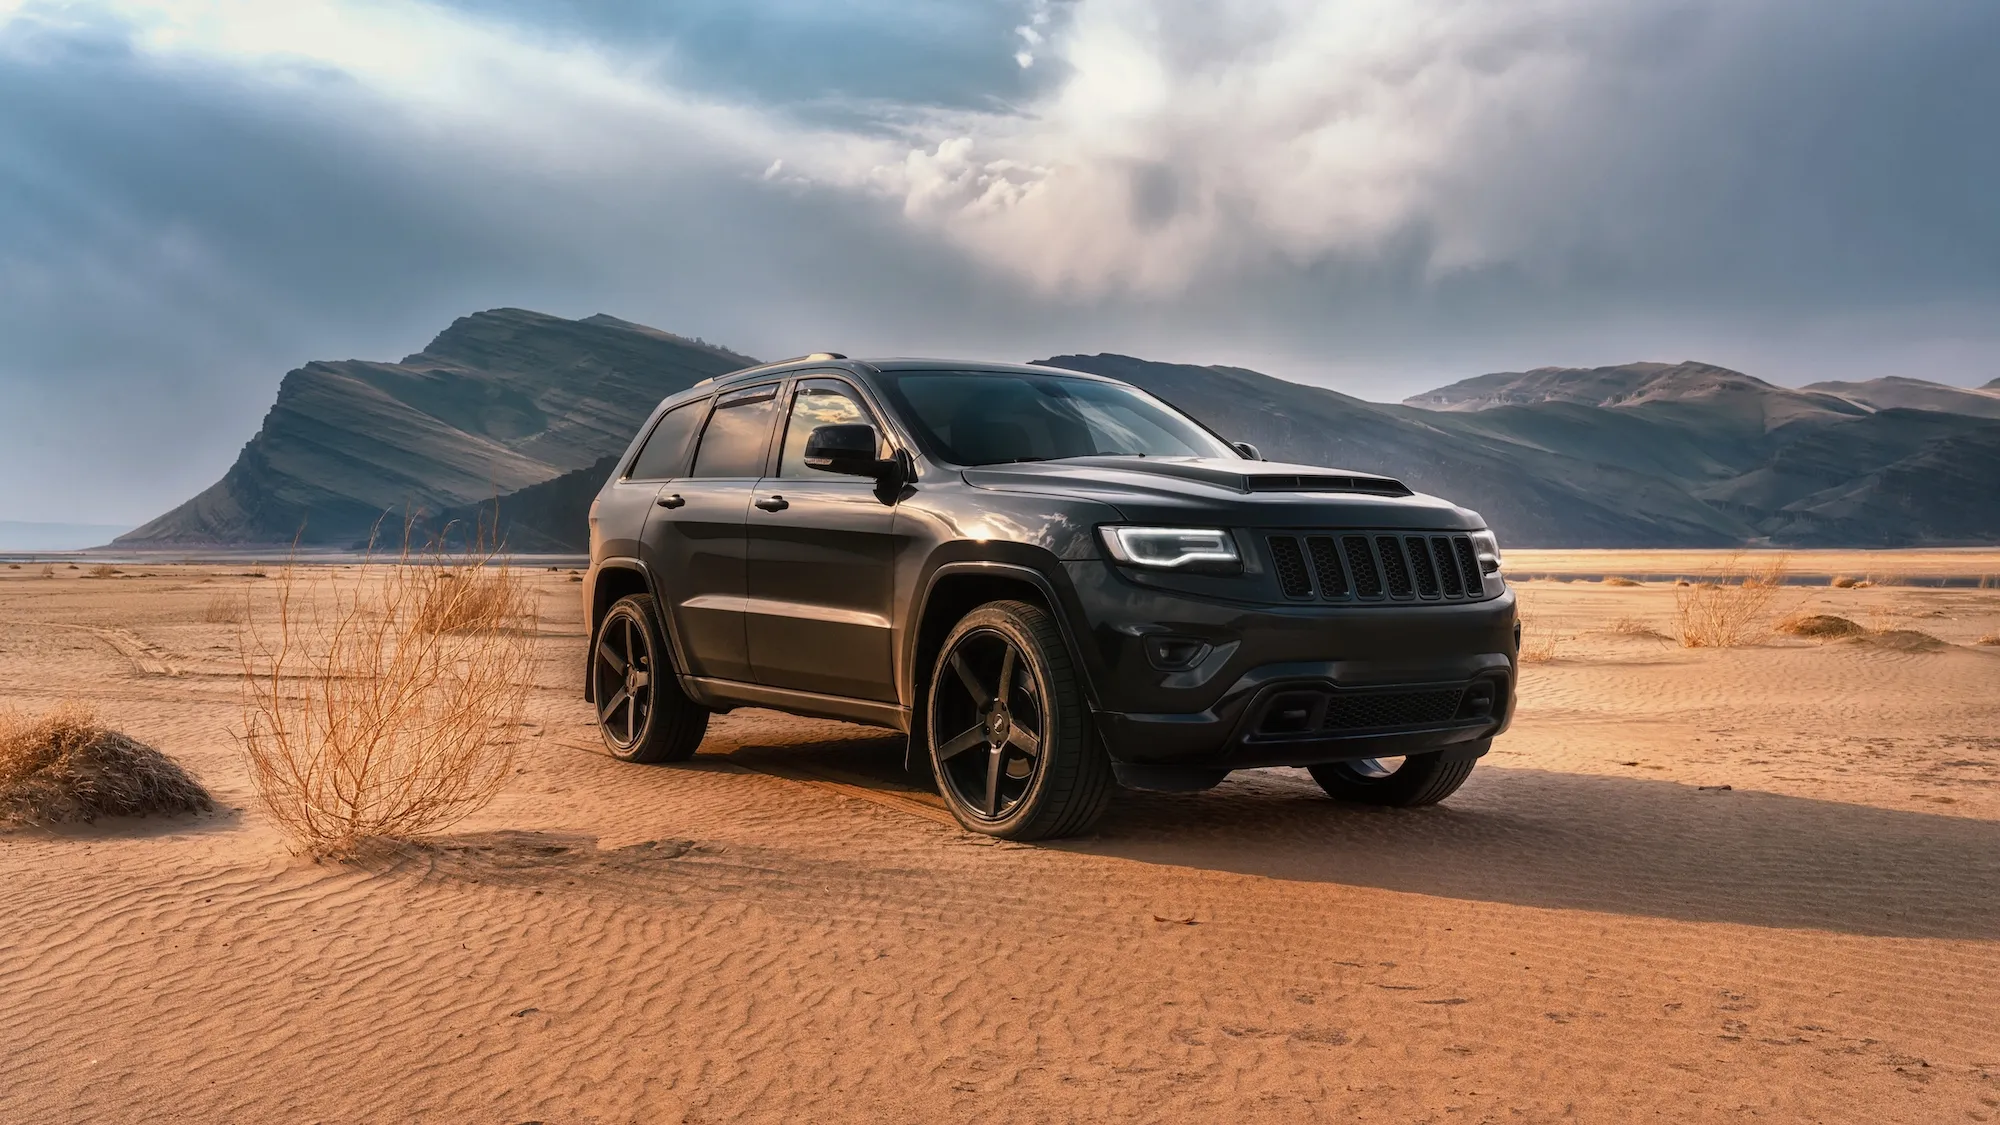 The All New Jeep Grand Cherokee: A Perfect Blend of Performance and Adventure